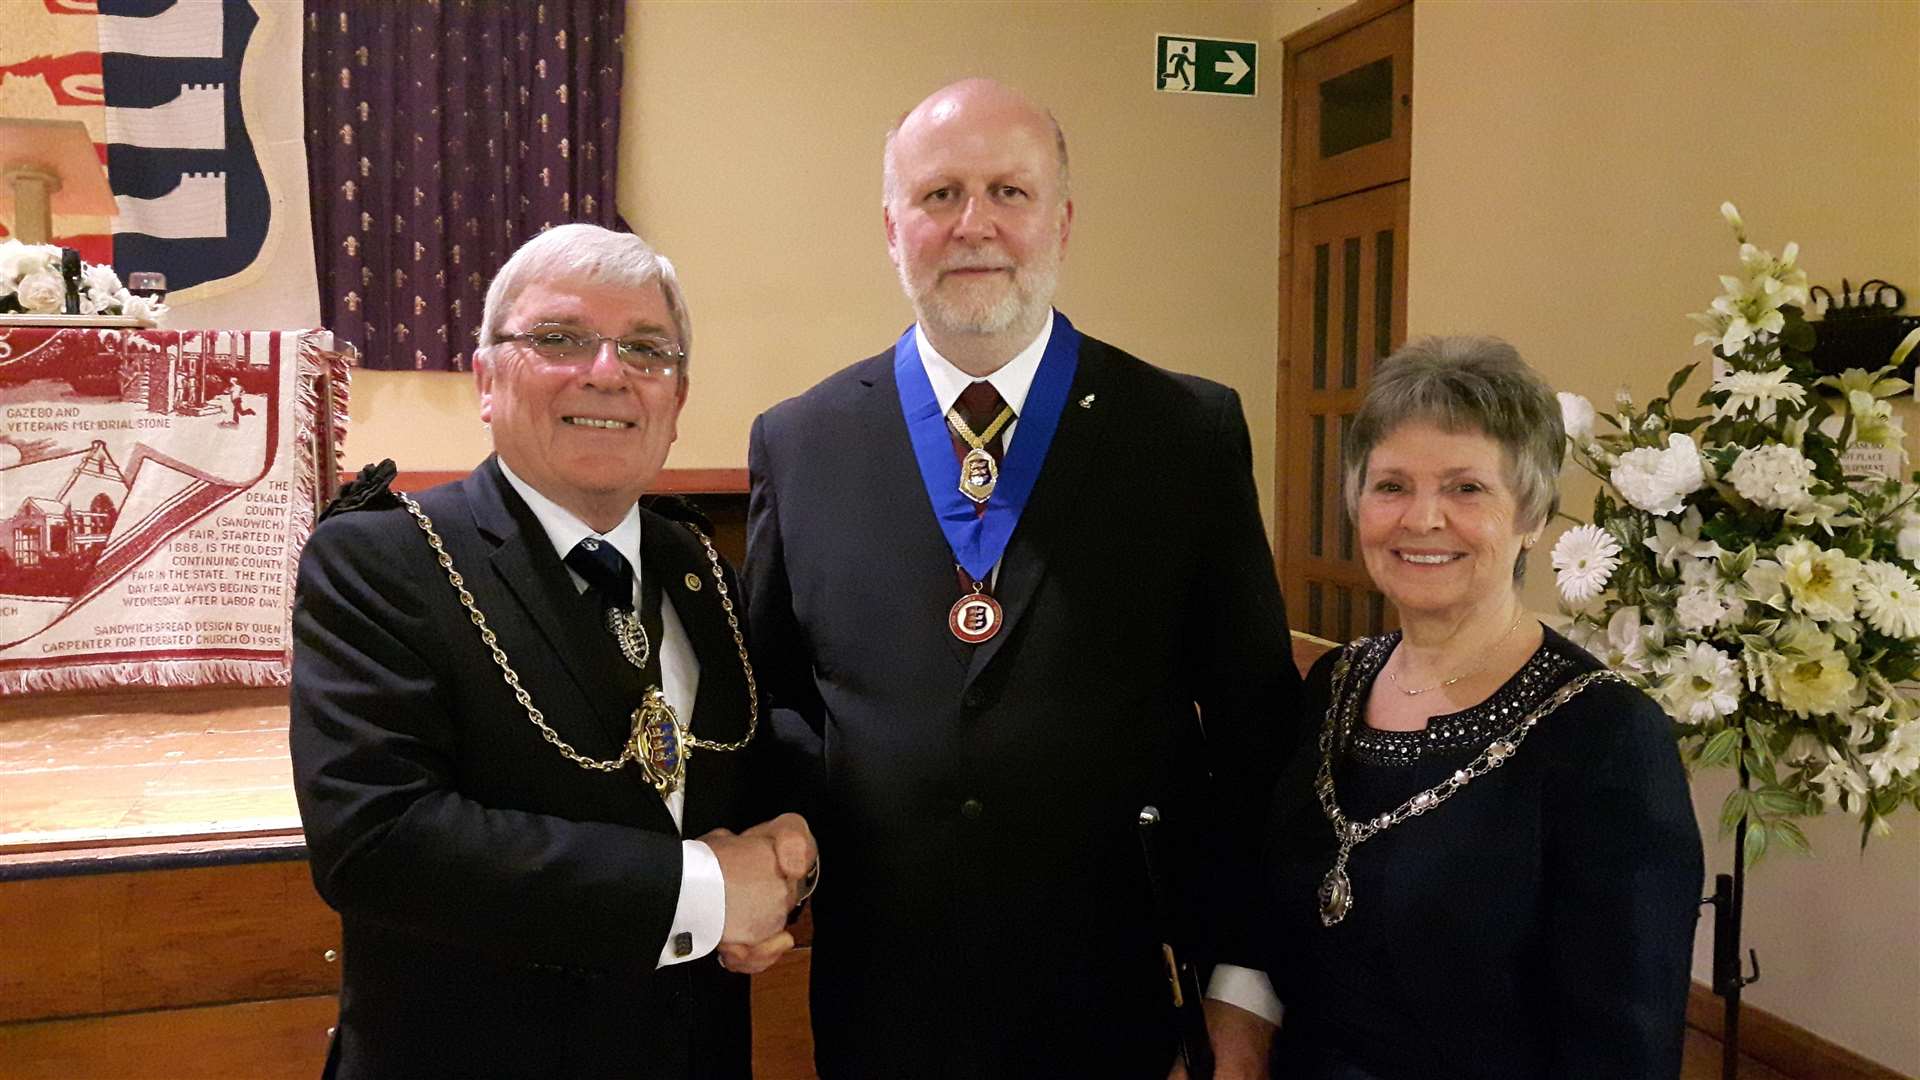 Simon Leith (centre), receiving his civic award, is one of three local heroes chosen to switch the town's lights on